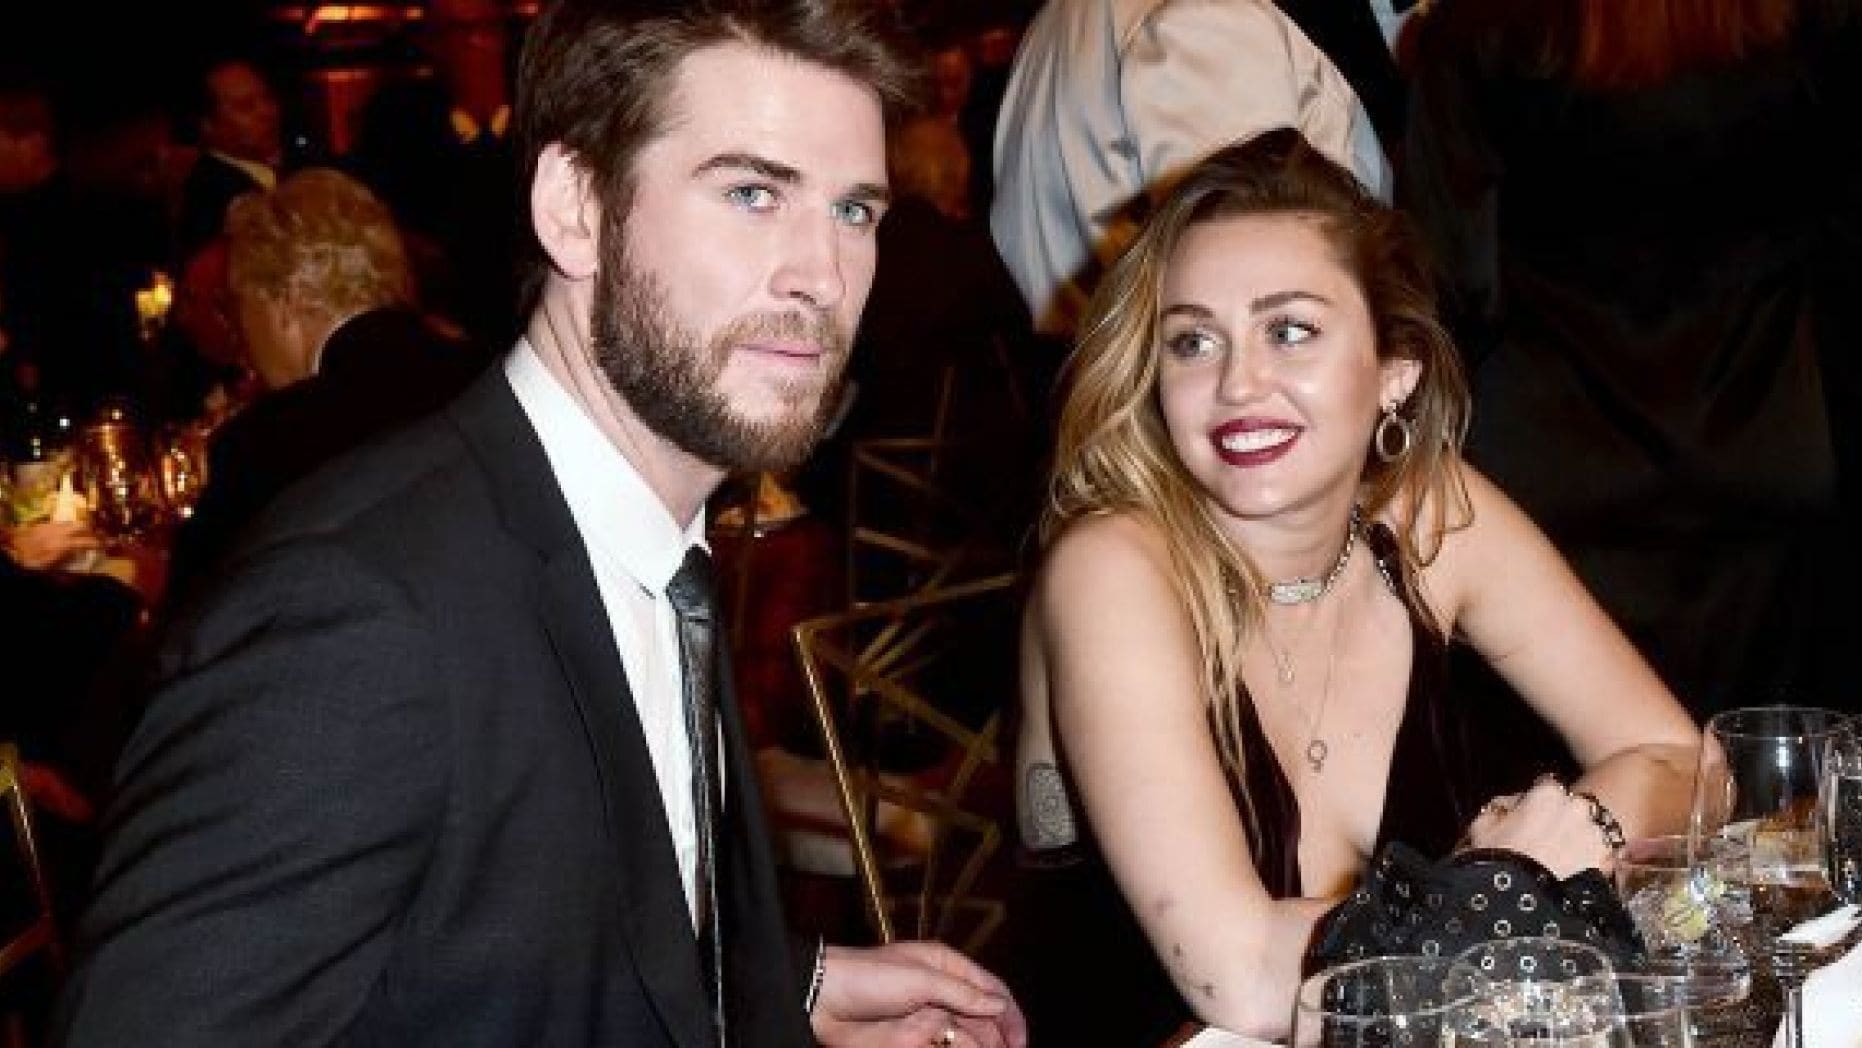 Miley Cyrus And Liam Hemsworth Expecting A Baby? – Here’s Why Fans Are Convinced ...